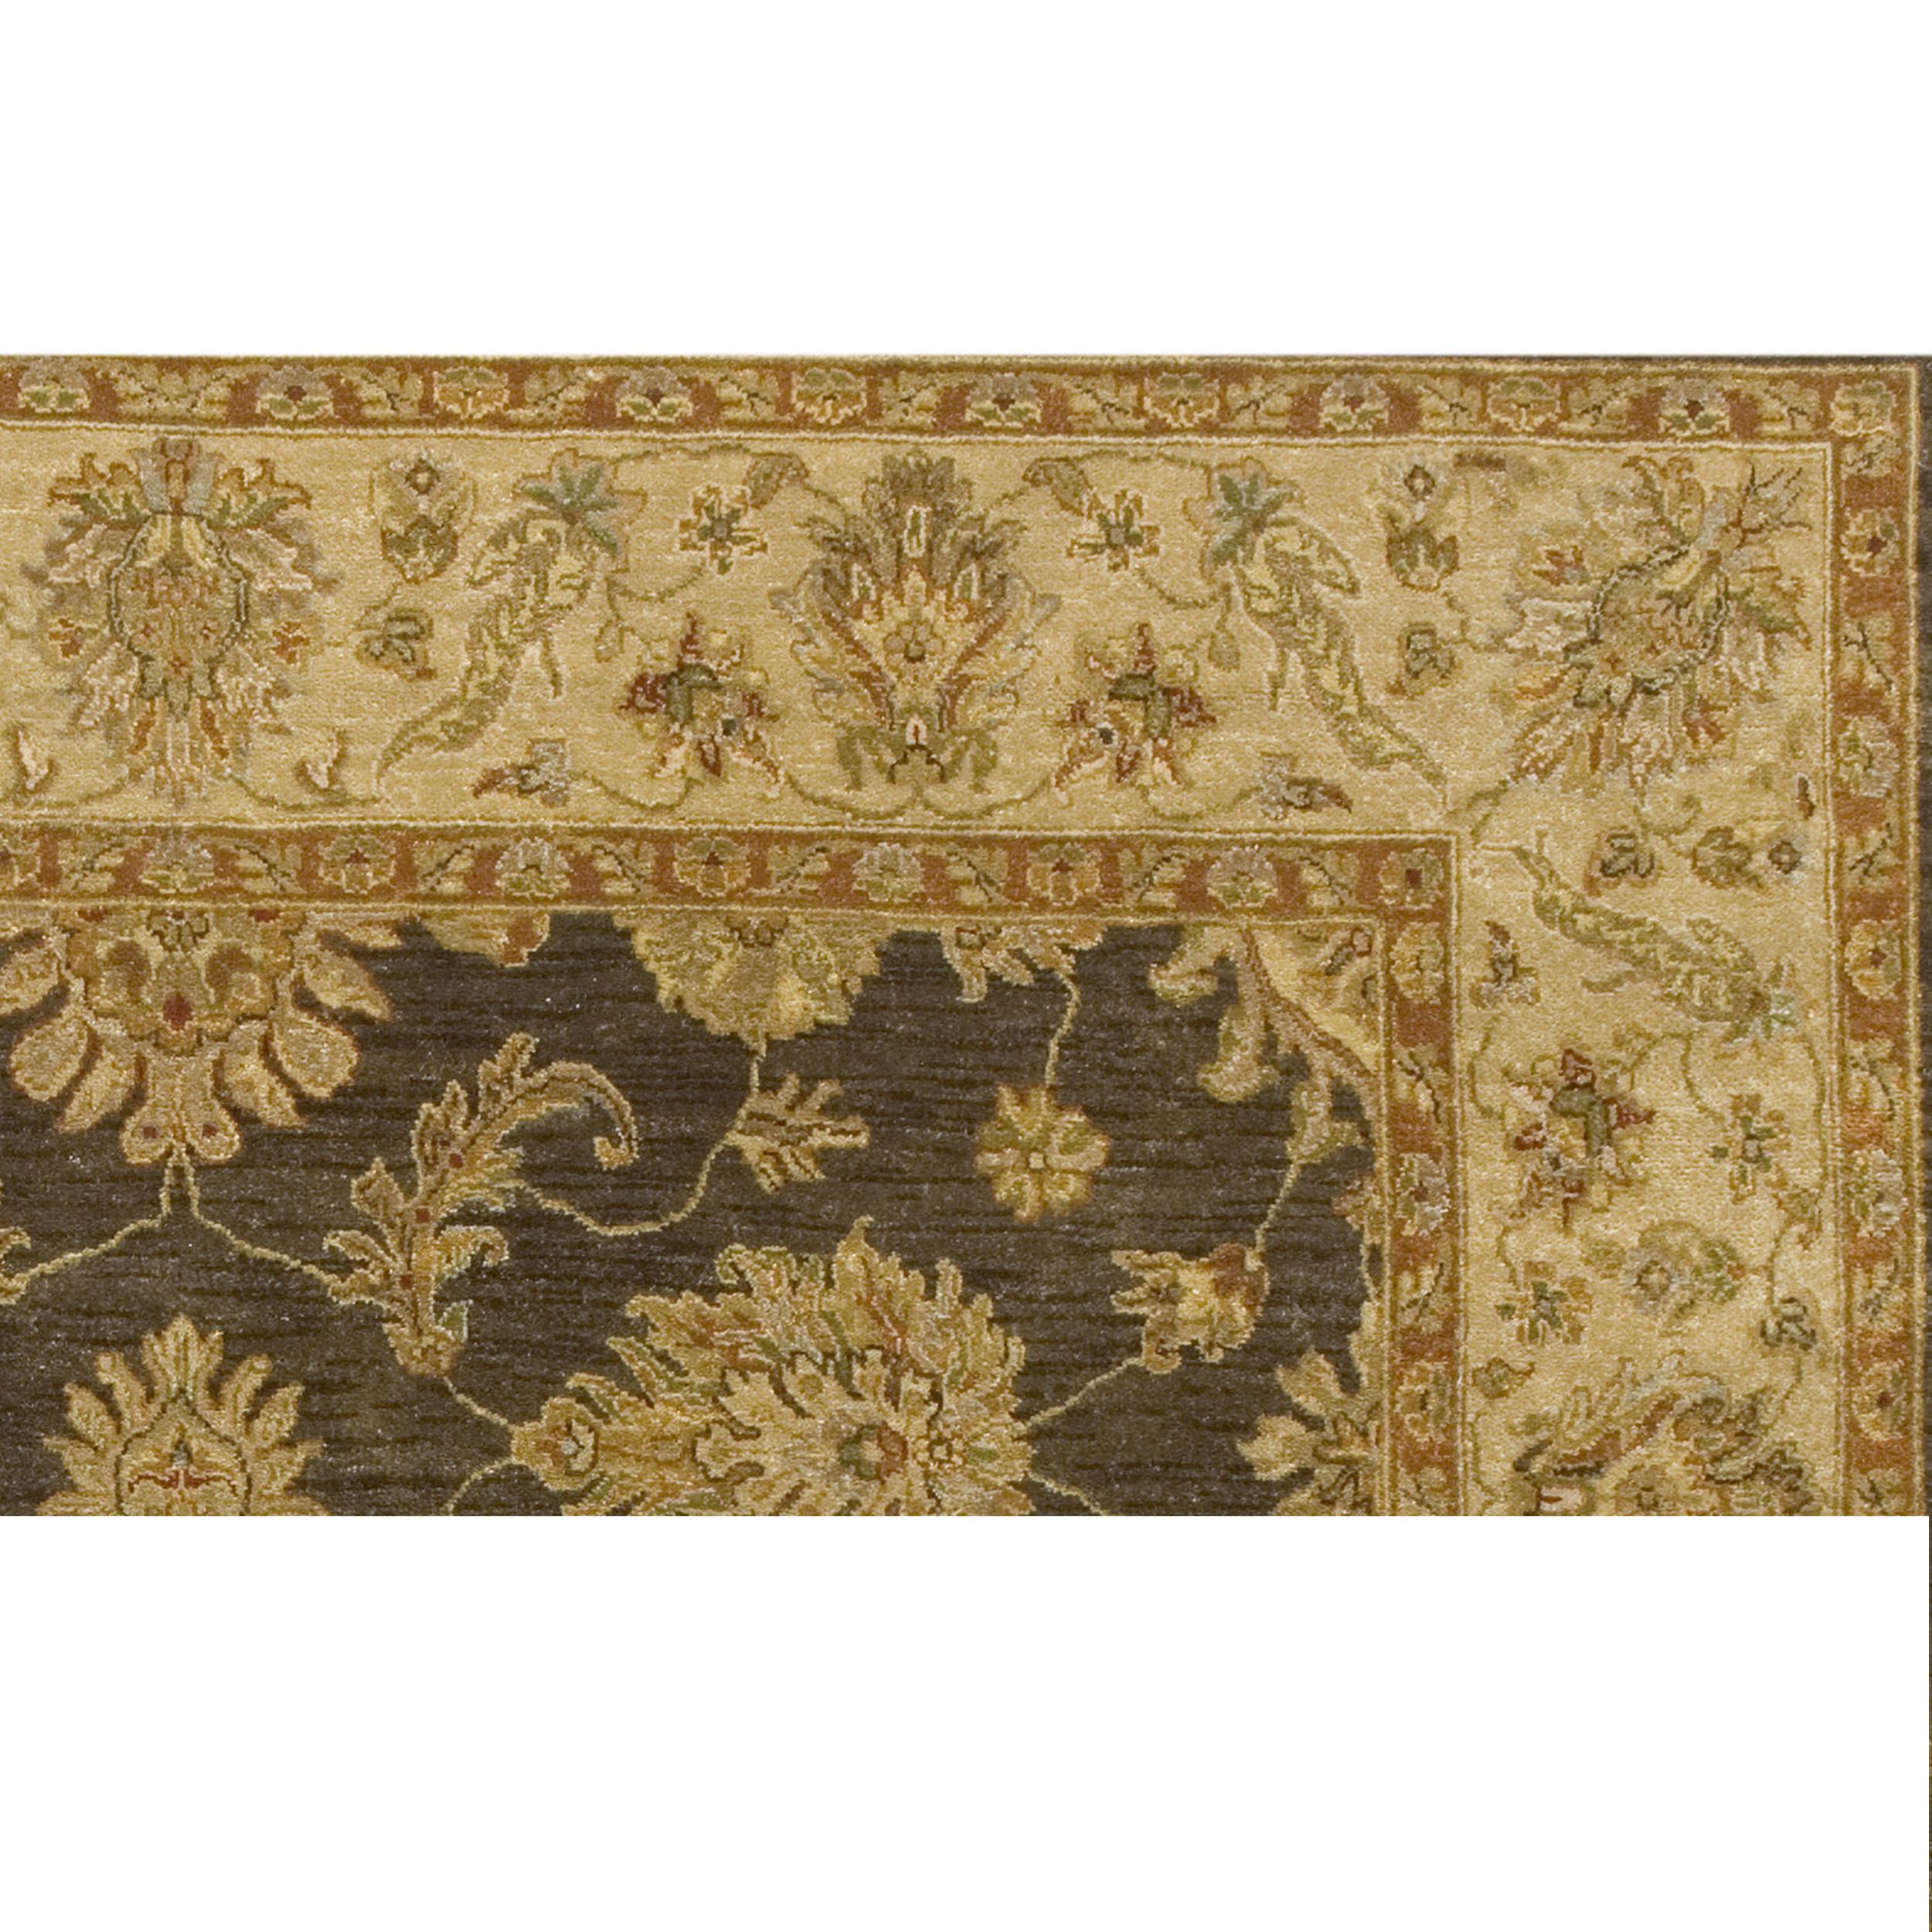 Luxury Traditional Hand-Knotted Amritsar Ziegler Brown/Beige 14x28 Rug In New Condition For Sale In Secaucus, NJ